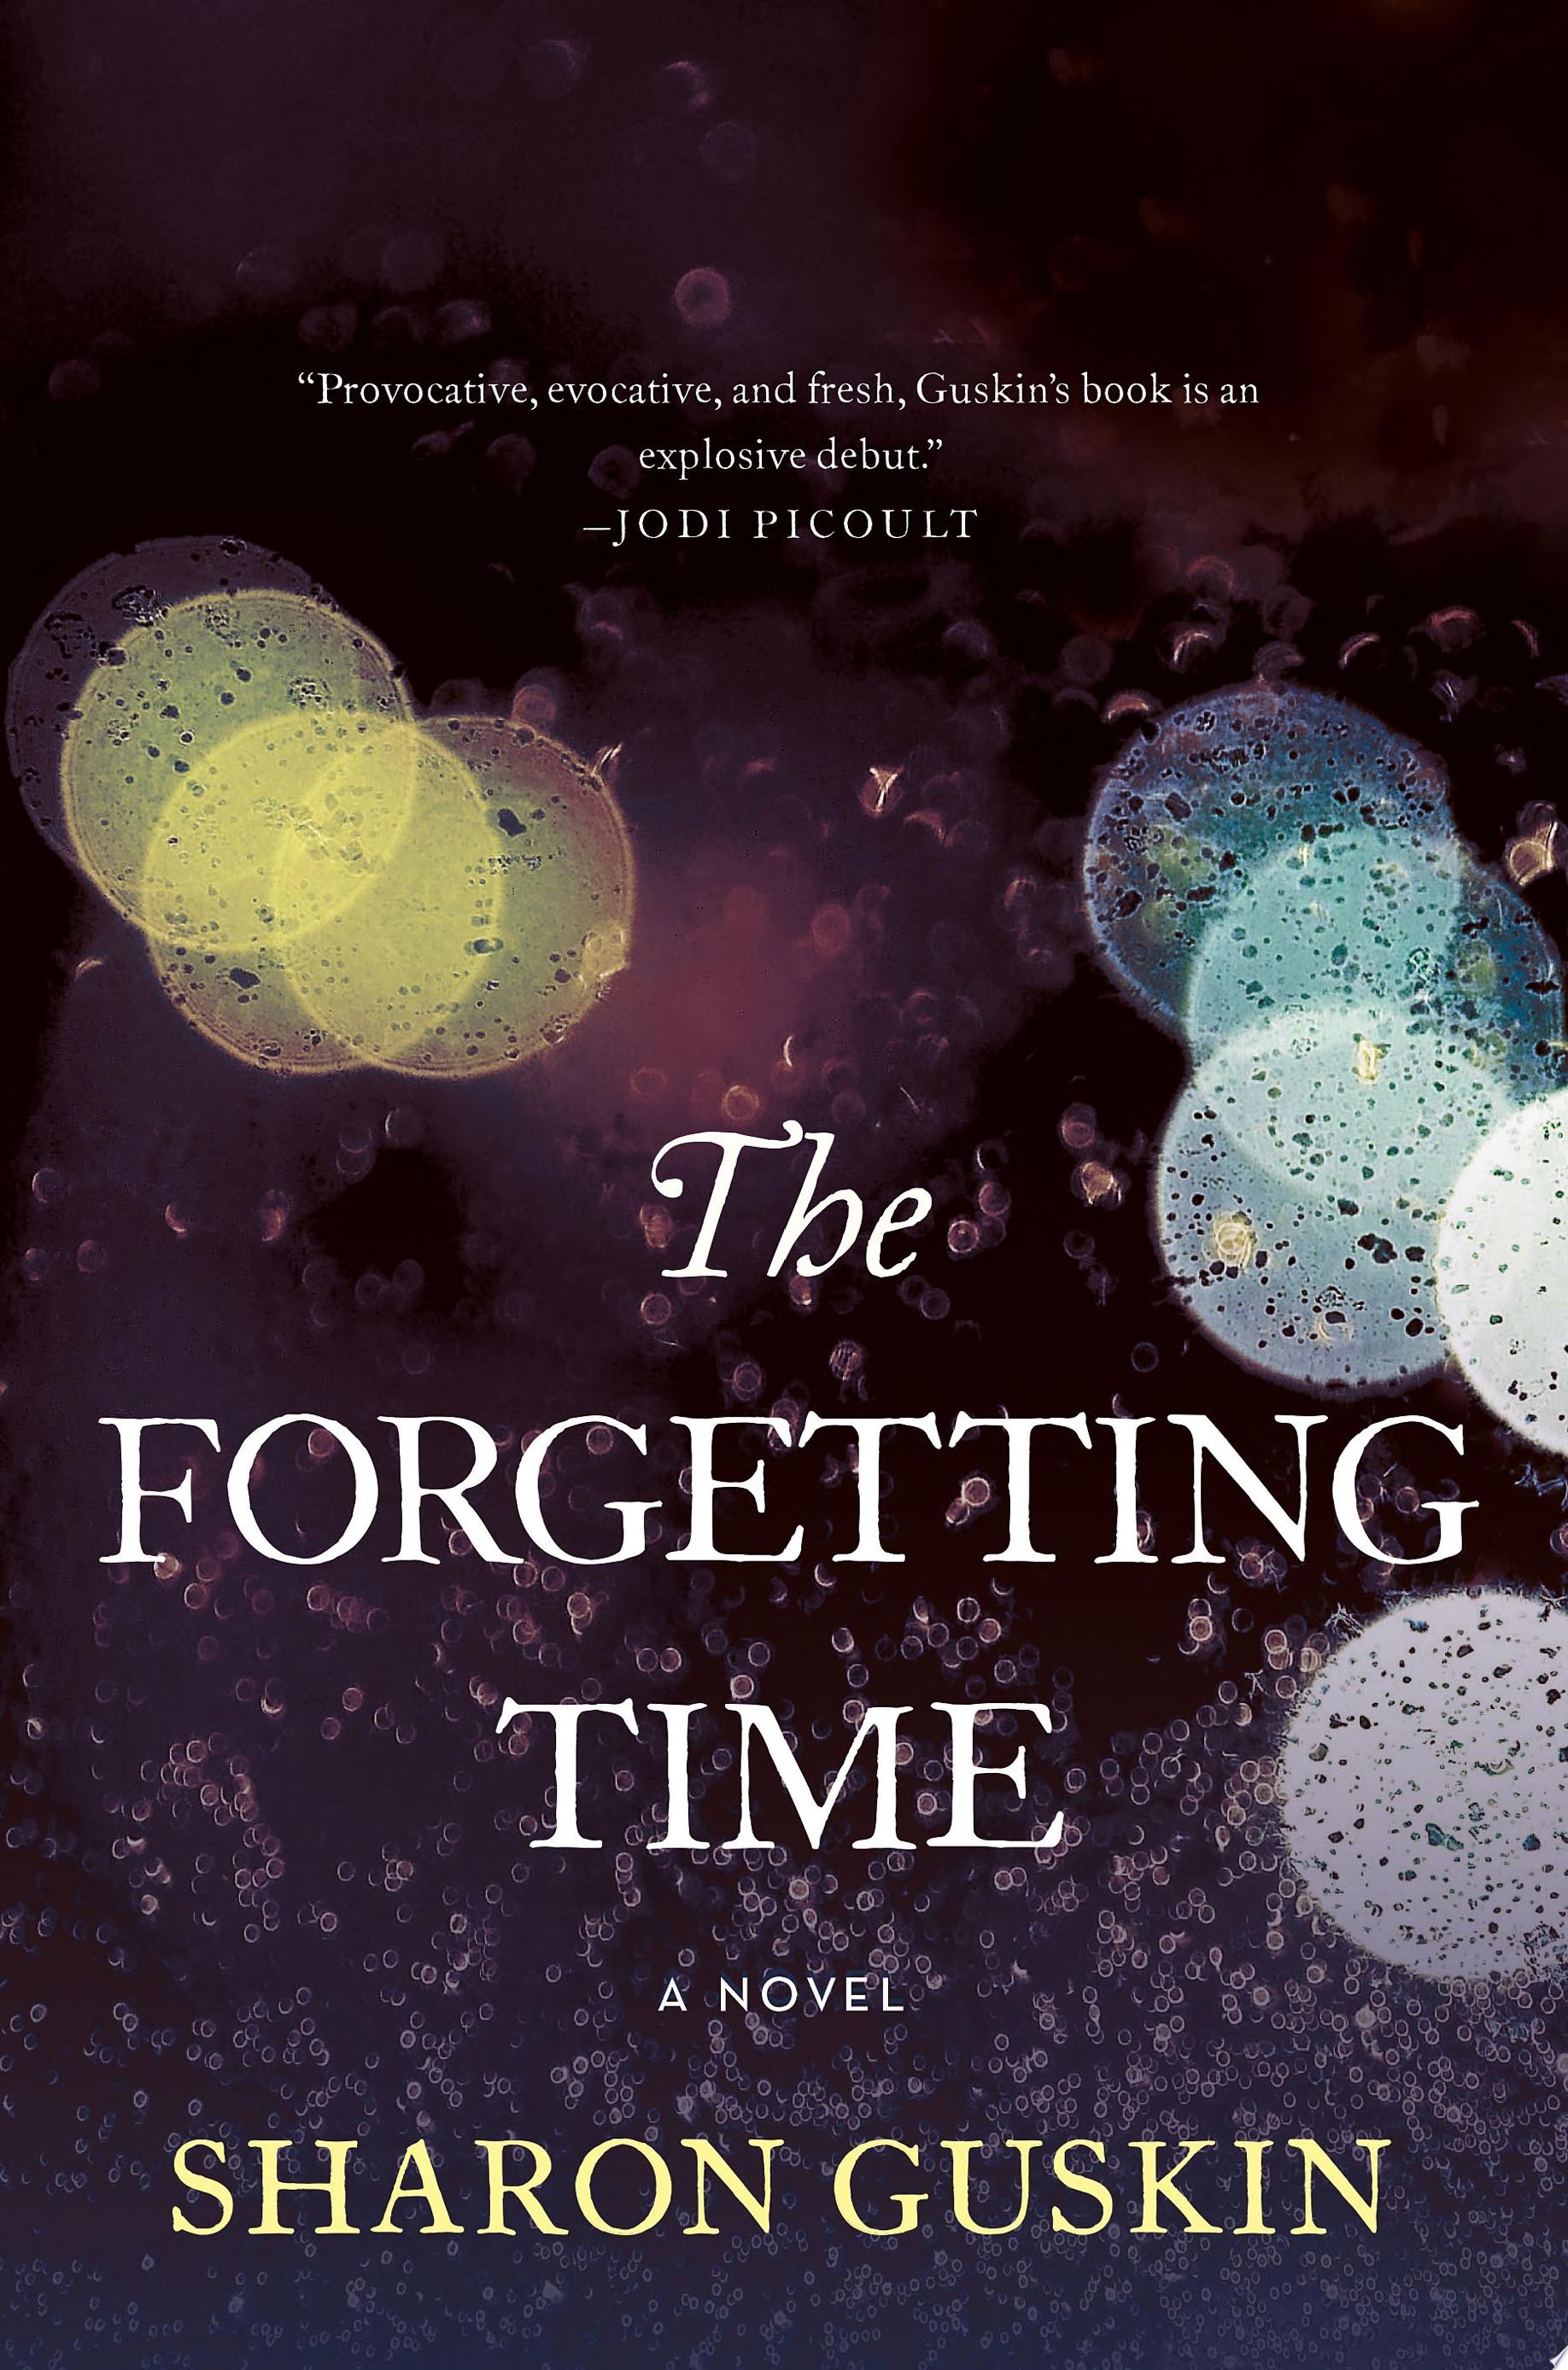 Image for "The Forgetting Time"